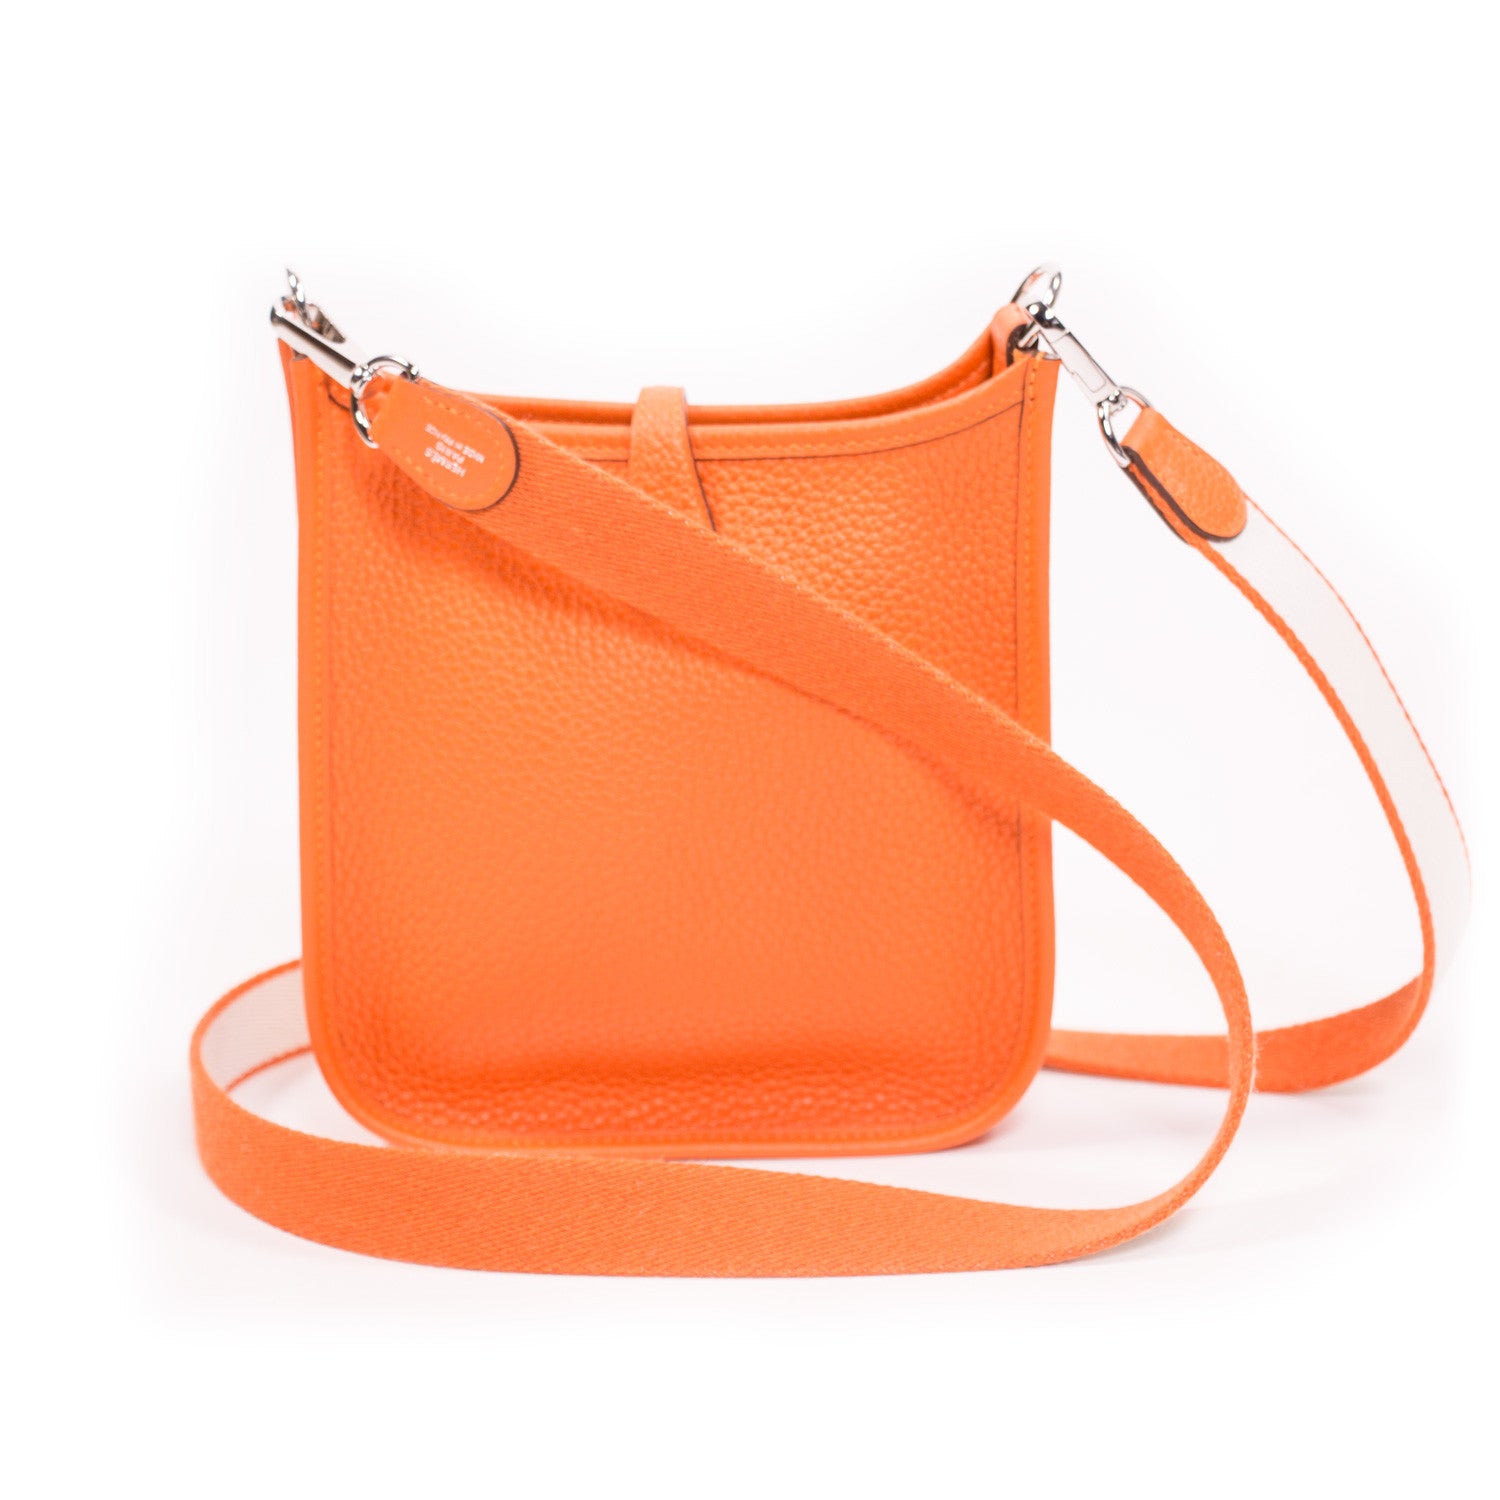 Shop authentic Hermes Evelyne TPM at revogue for just USD 2,599.00